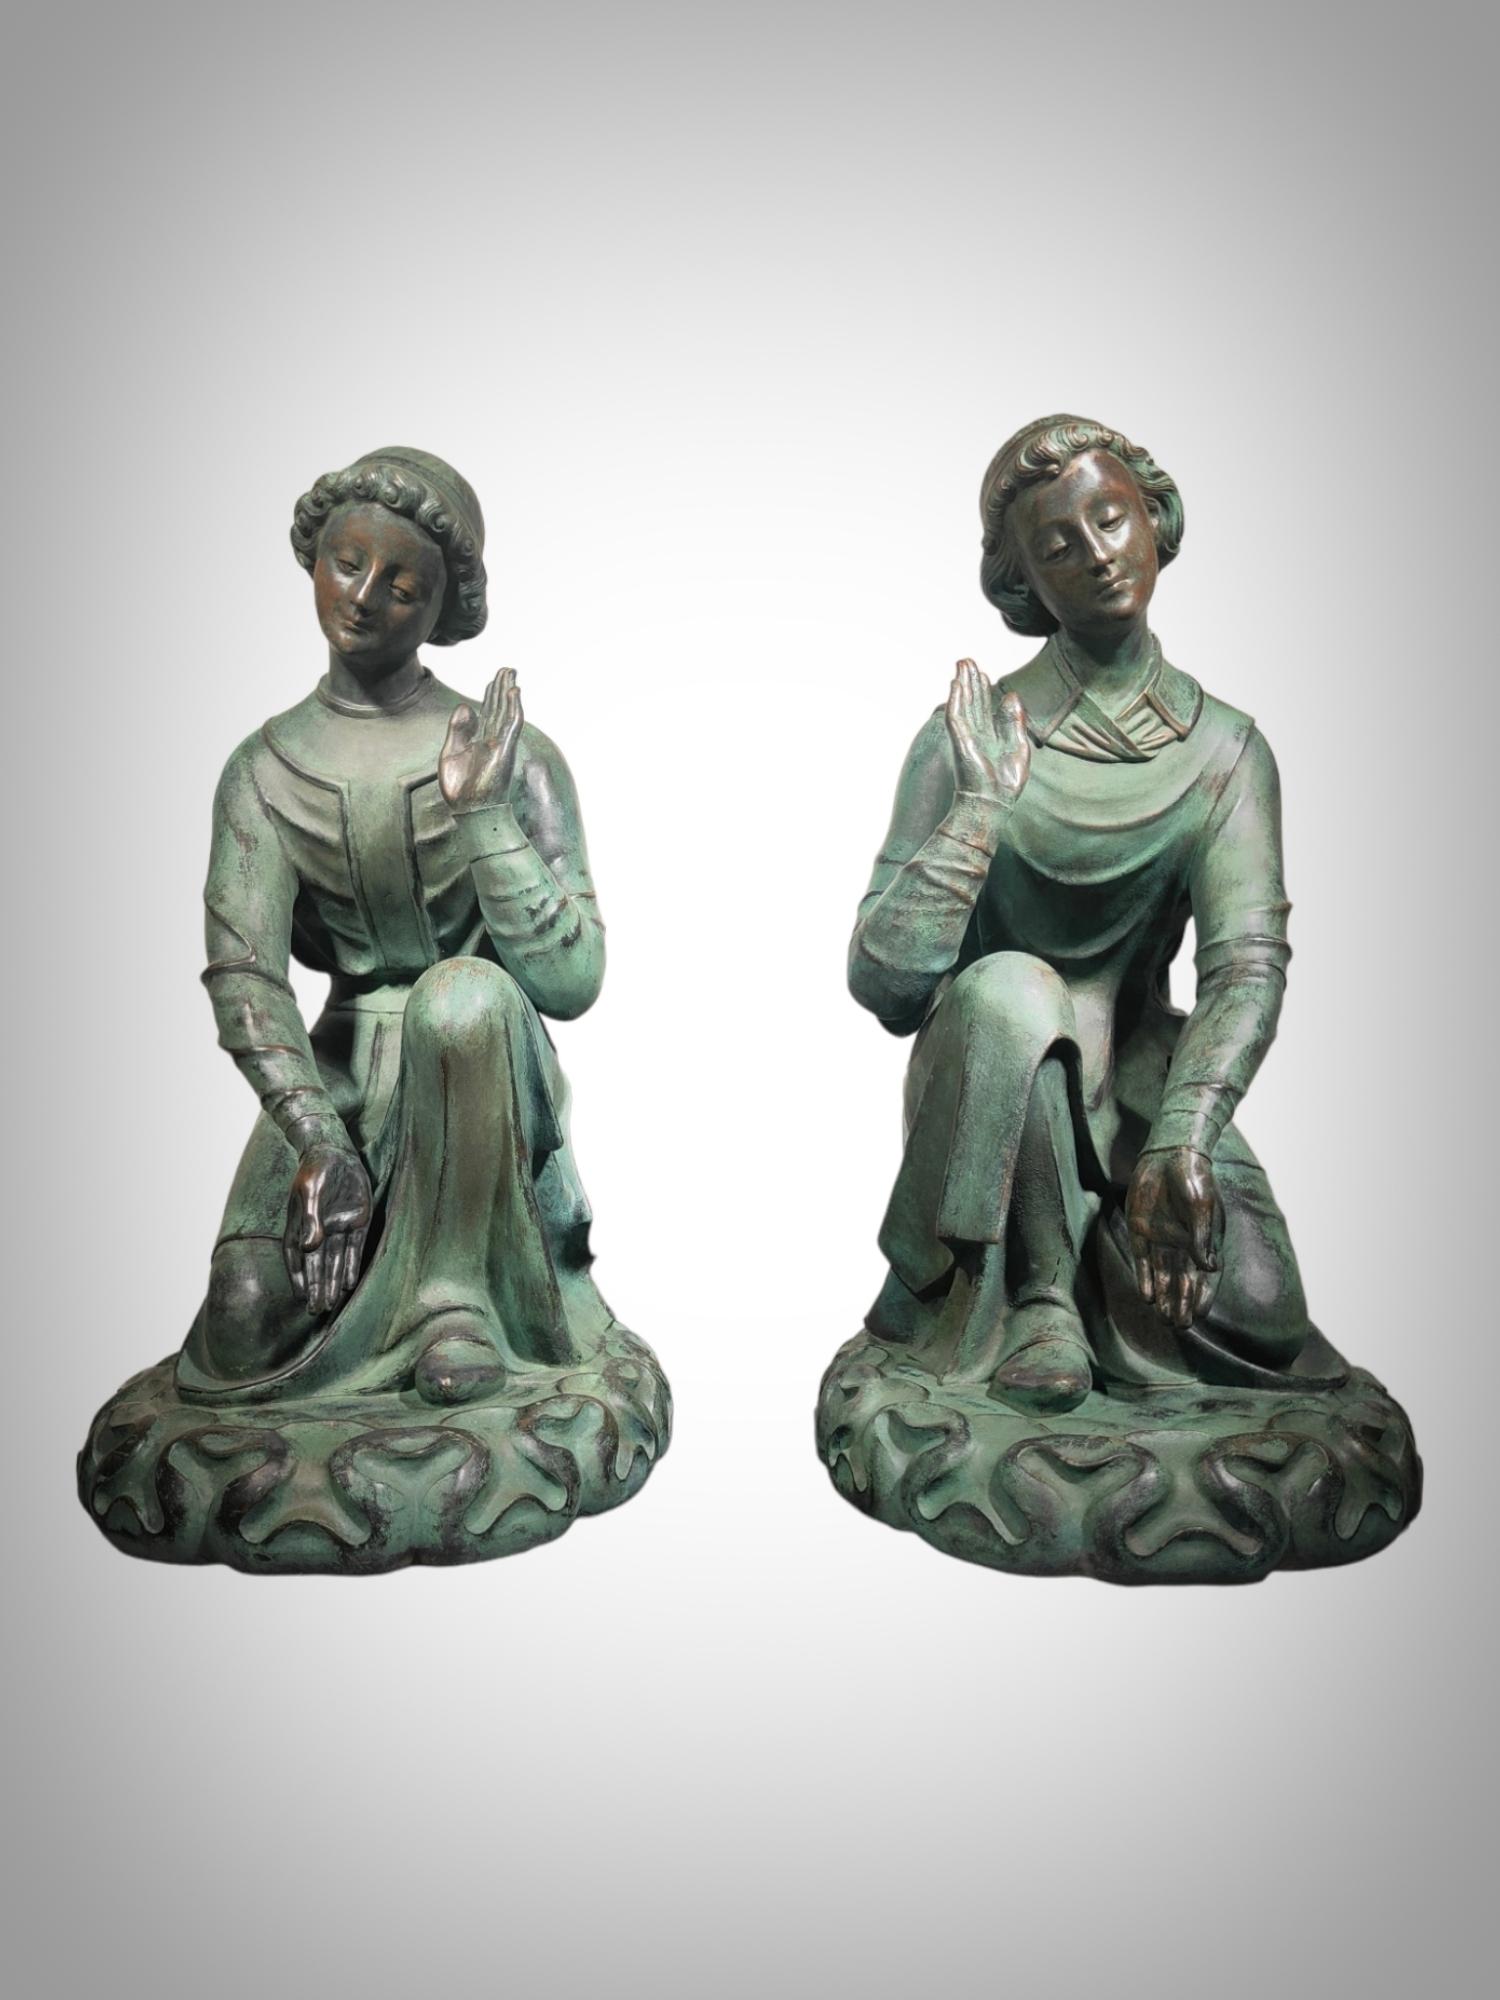 Extraordinary Pair of Antique French Angels
PAIR OF LARGE DIMENSIONS OF 2 ANGELS IN BRONZE PATINA IN GREEN. THE QUALITY IS VERY NICE. THEY REPRESENT 2 PROTECTIVE ANGELS FROM THE END OF THE 18TH CENTURY. MUSEUM PIECES. MEASUREMENTS: 75X50X35 CM AND